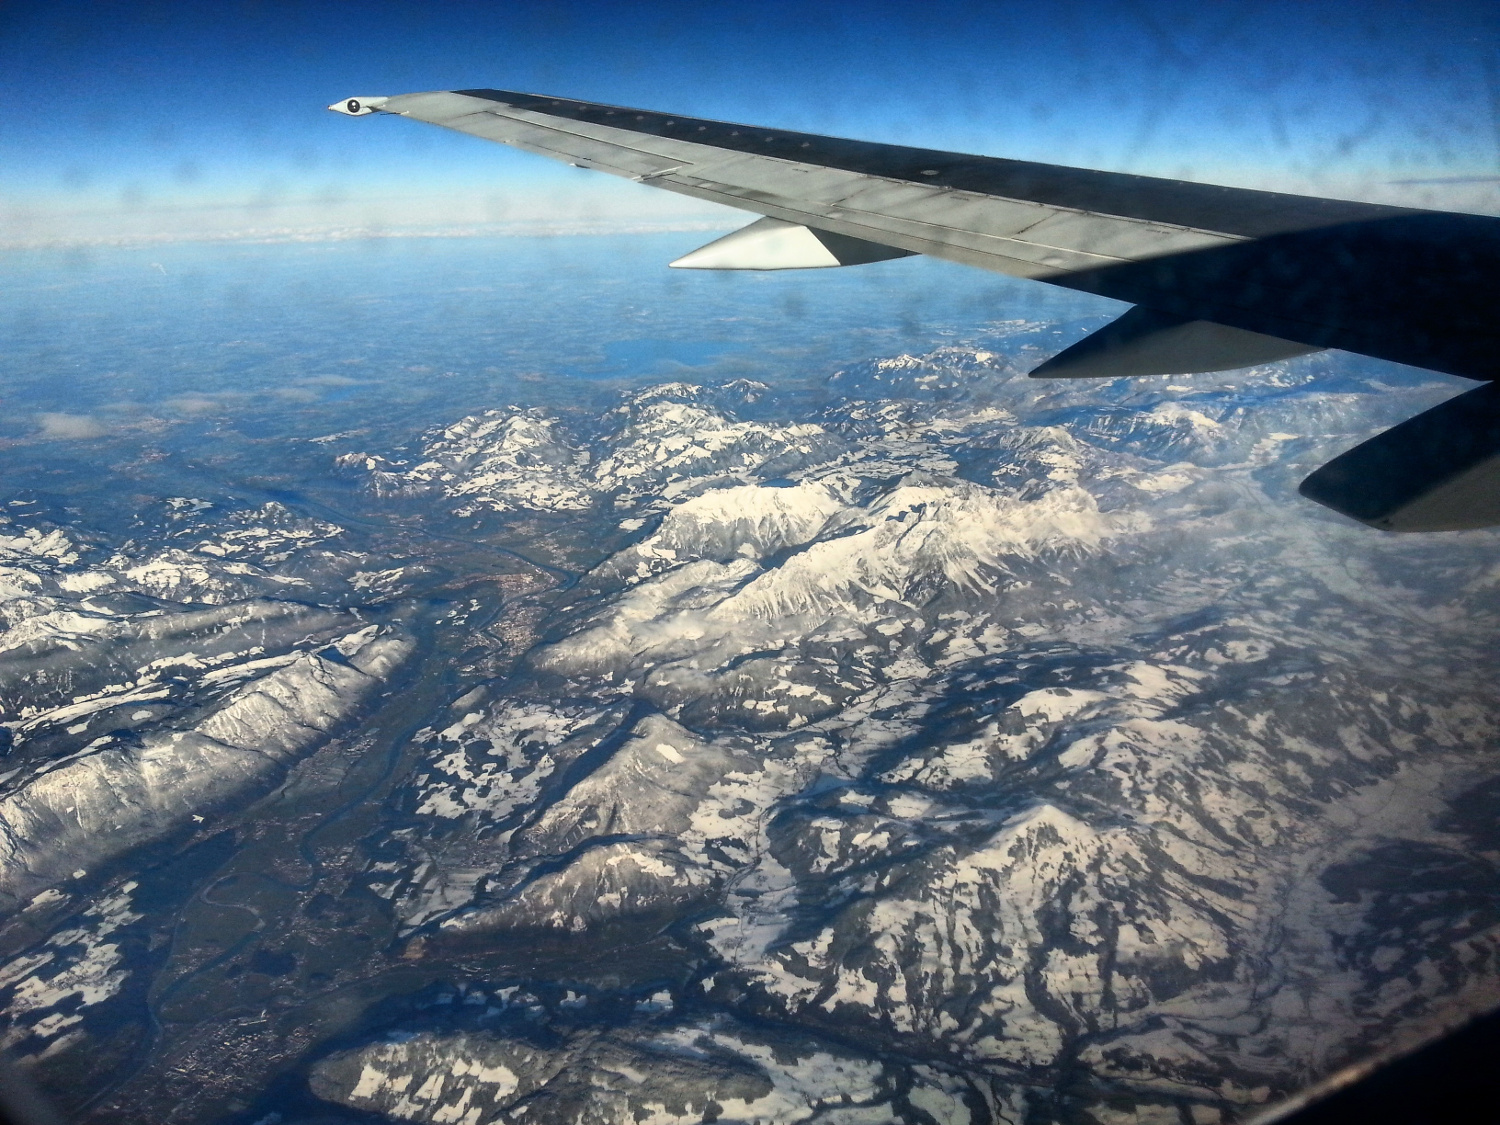 Mountains seen from the airplane